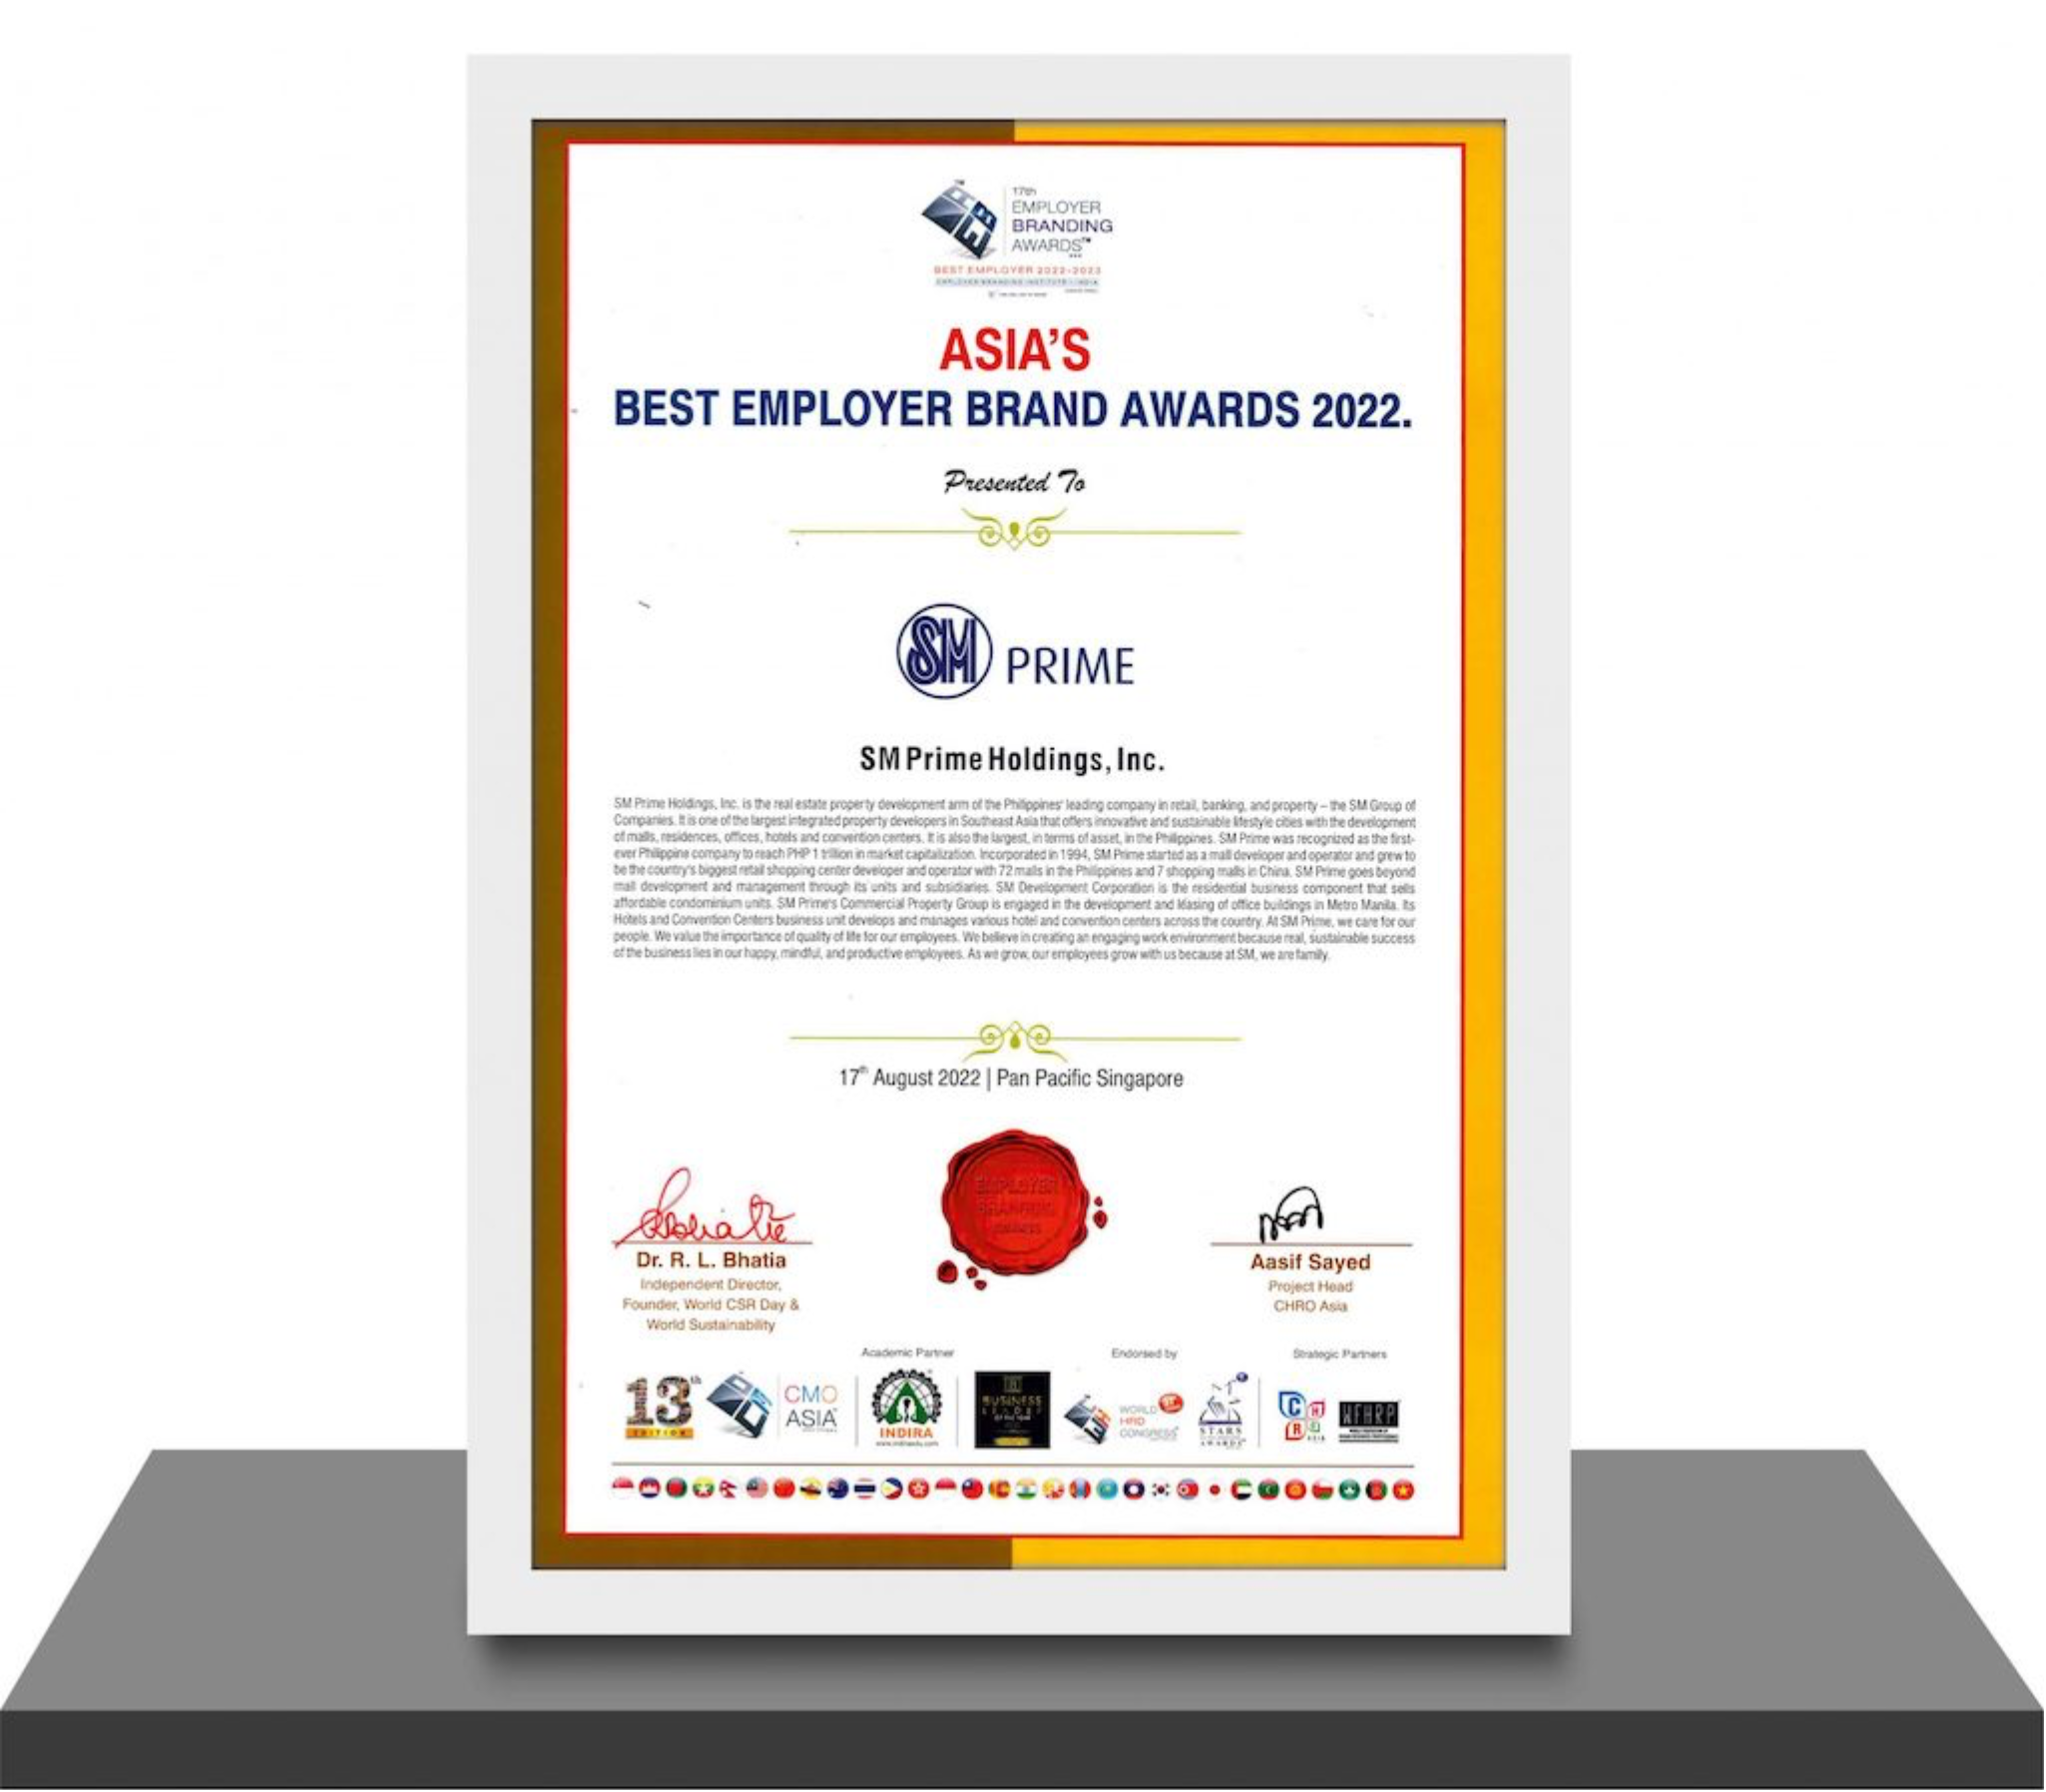 SM Prime Wins Asia’s Best Employer in the 2022 Asia’s Best Employer Brand Awards